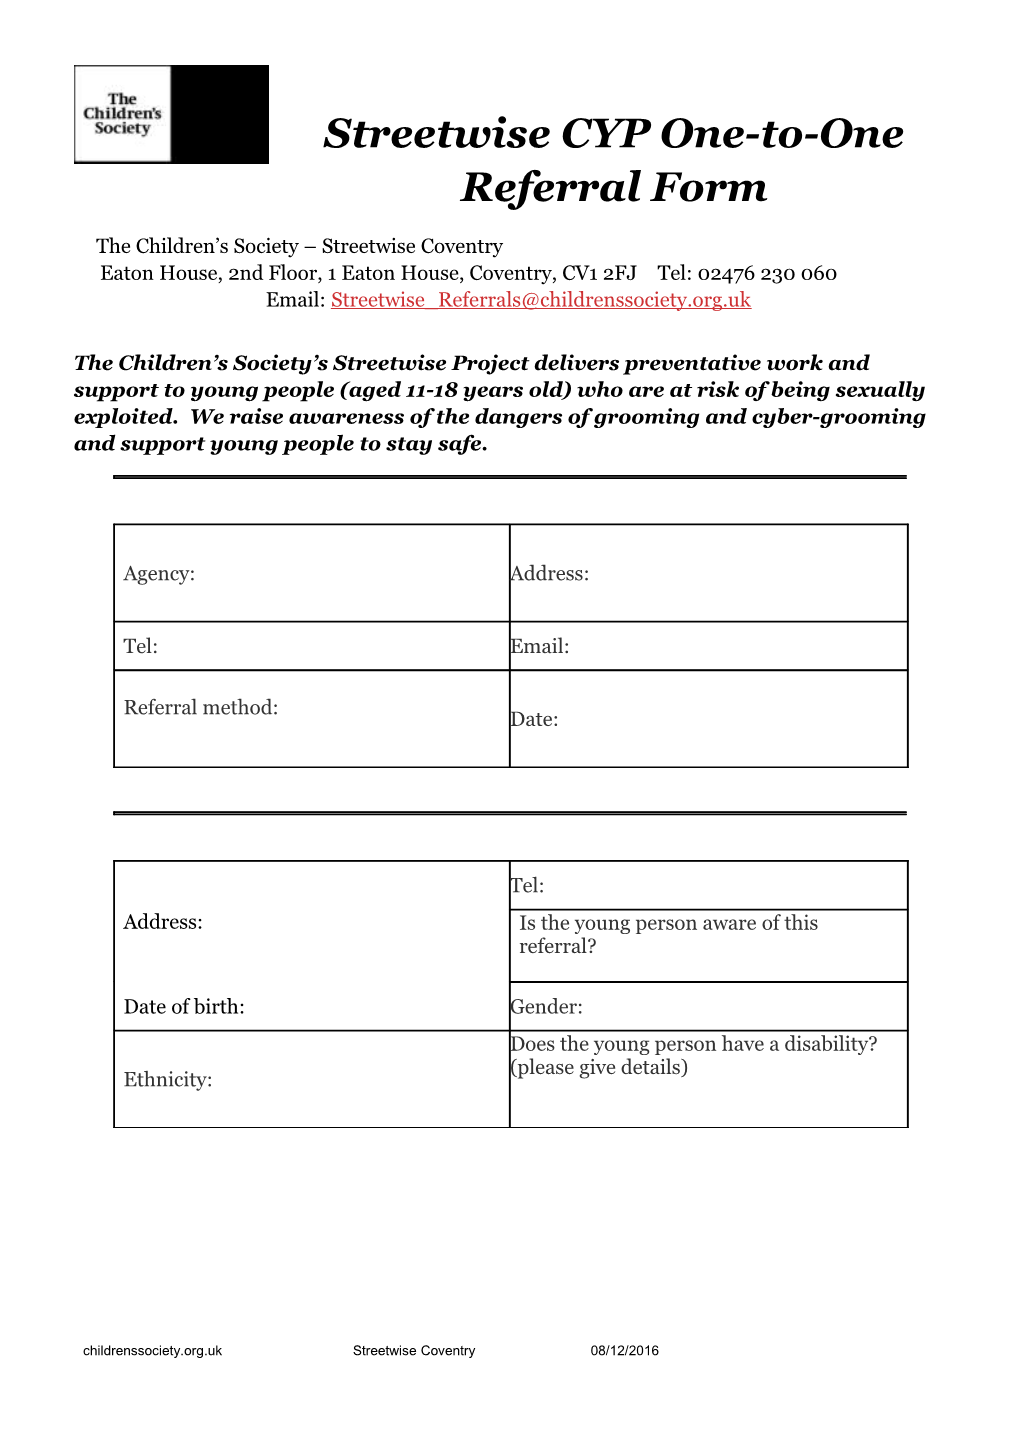 Streetwise CYP One-To-One Referral Form